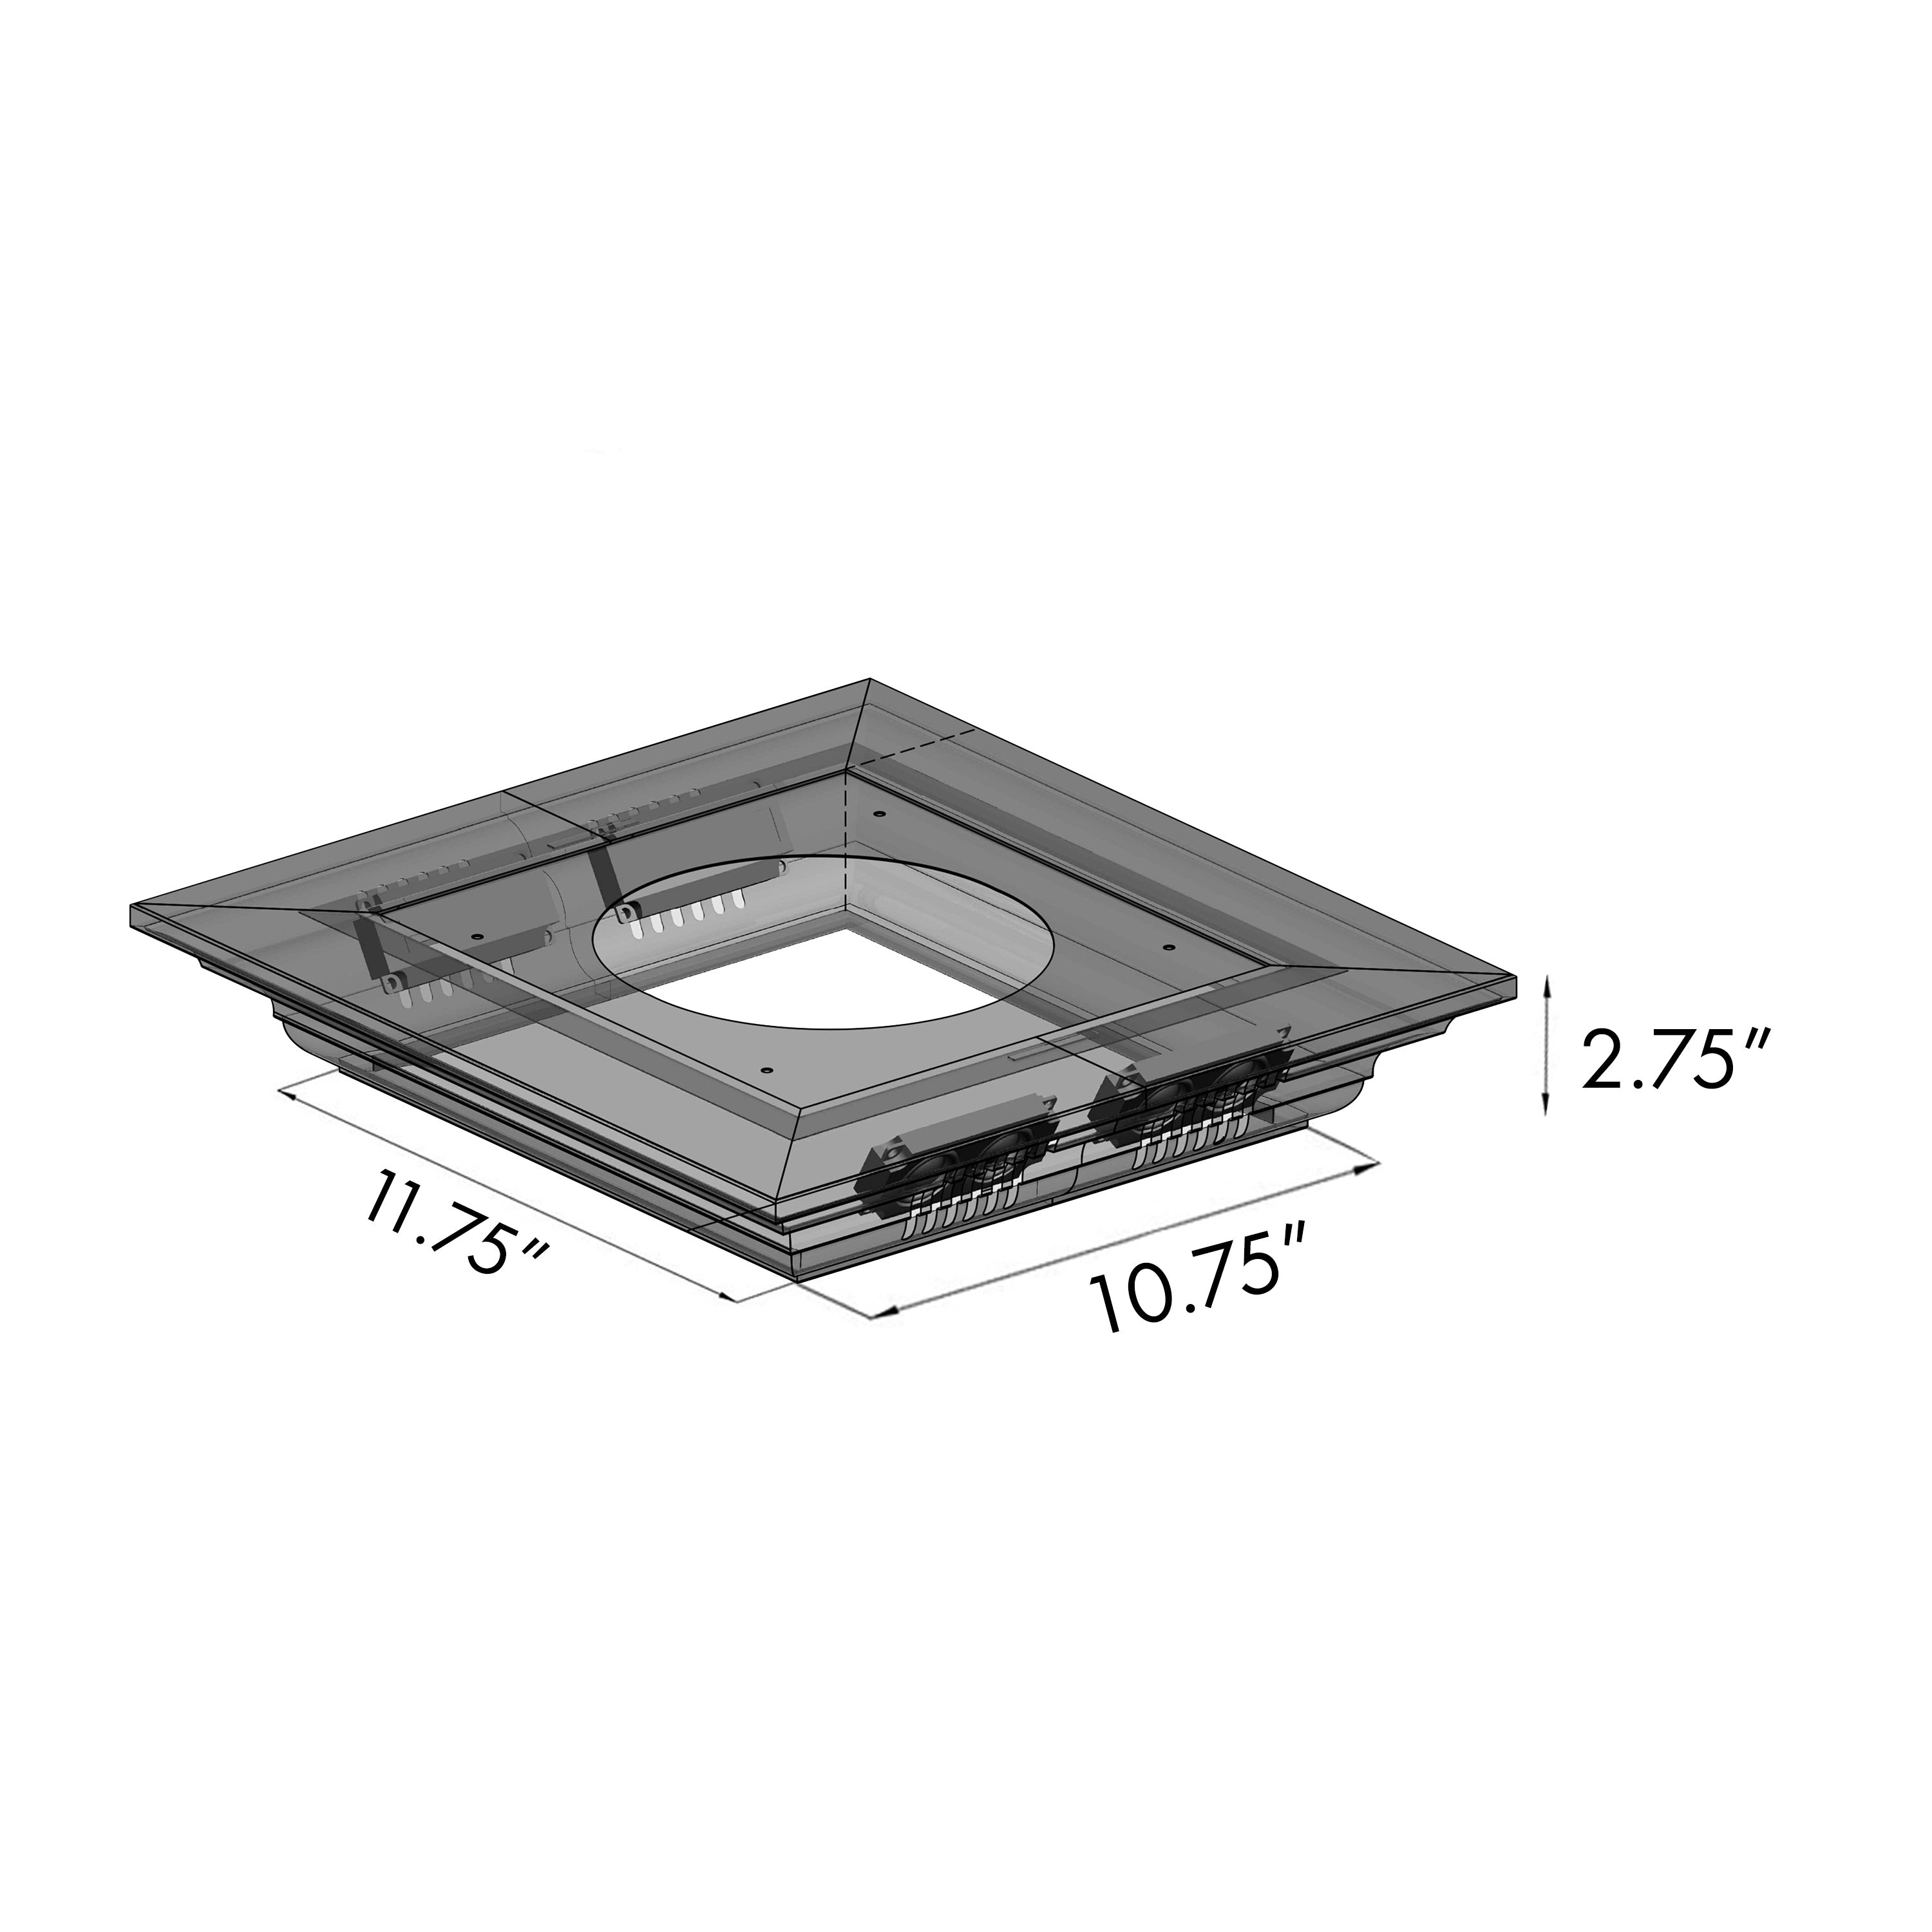 36" ZLINE CrownSound‚ Ducted Vent Island Mount Range Hood in Stainless Steel with Built-in Bluetooth Speakers (GL9iCRN-BT-36)